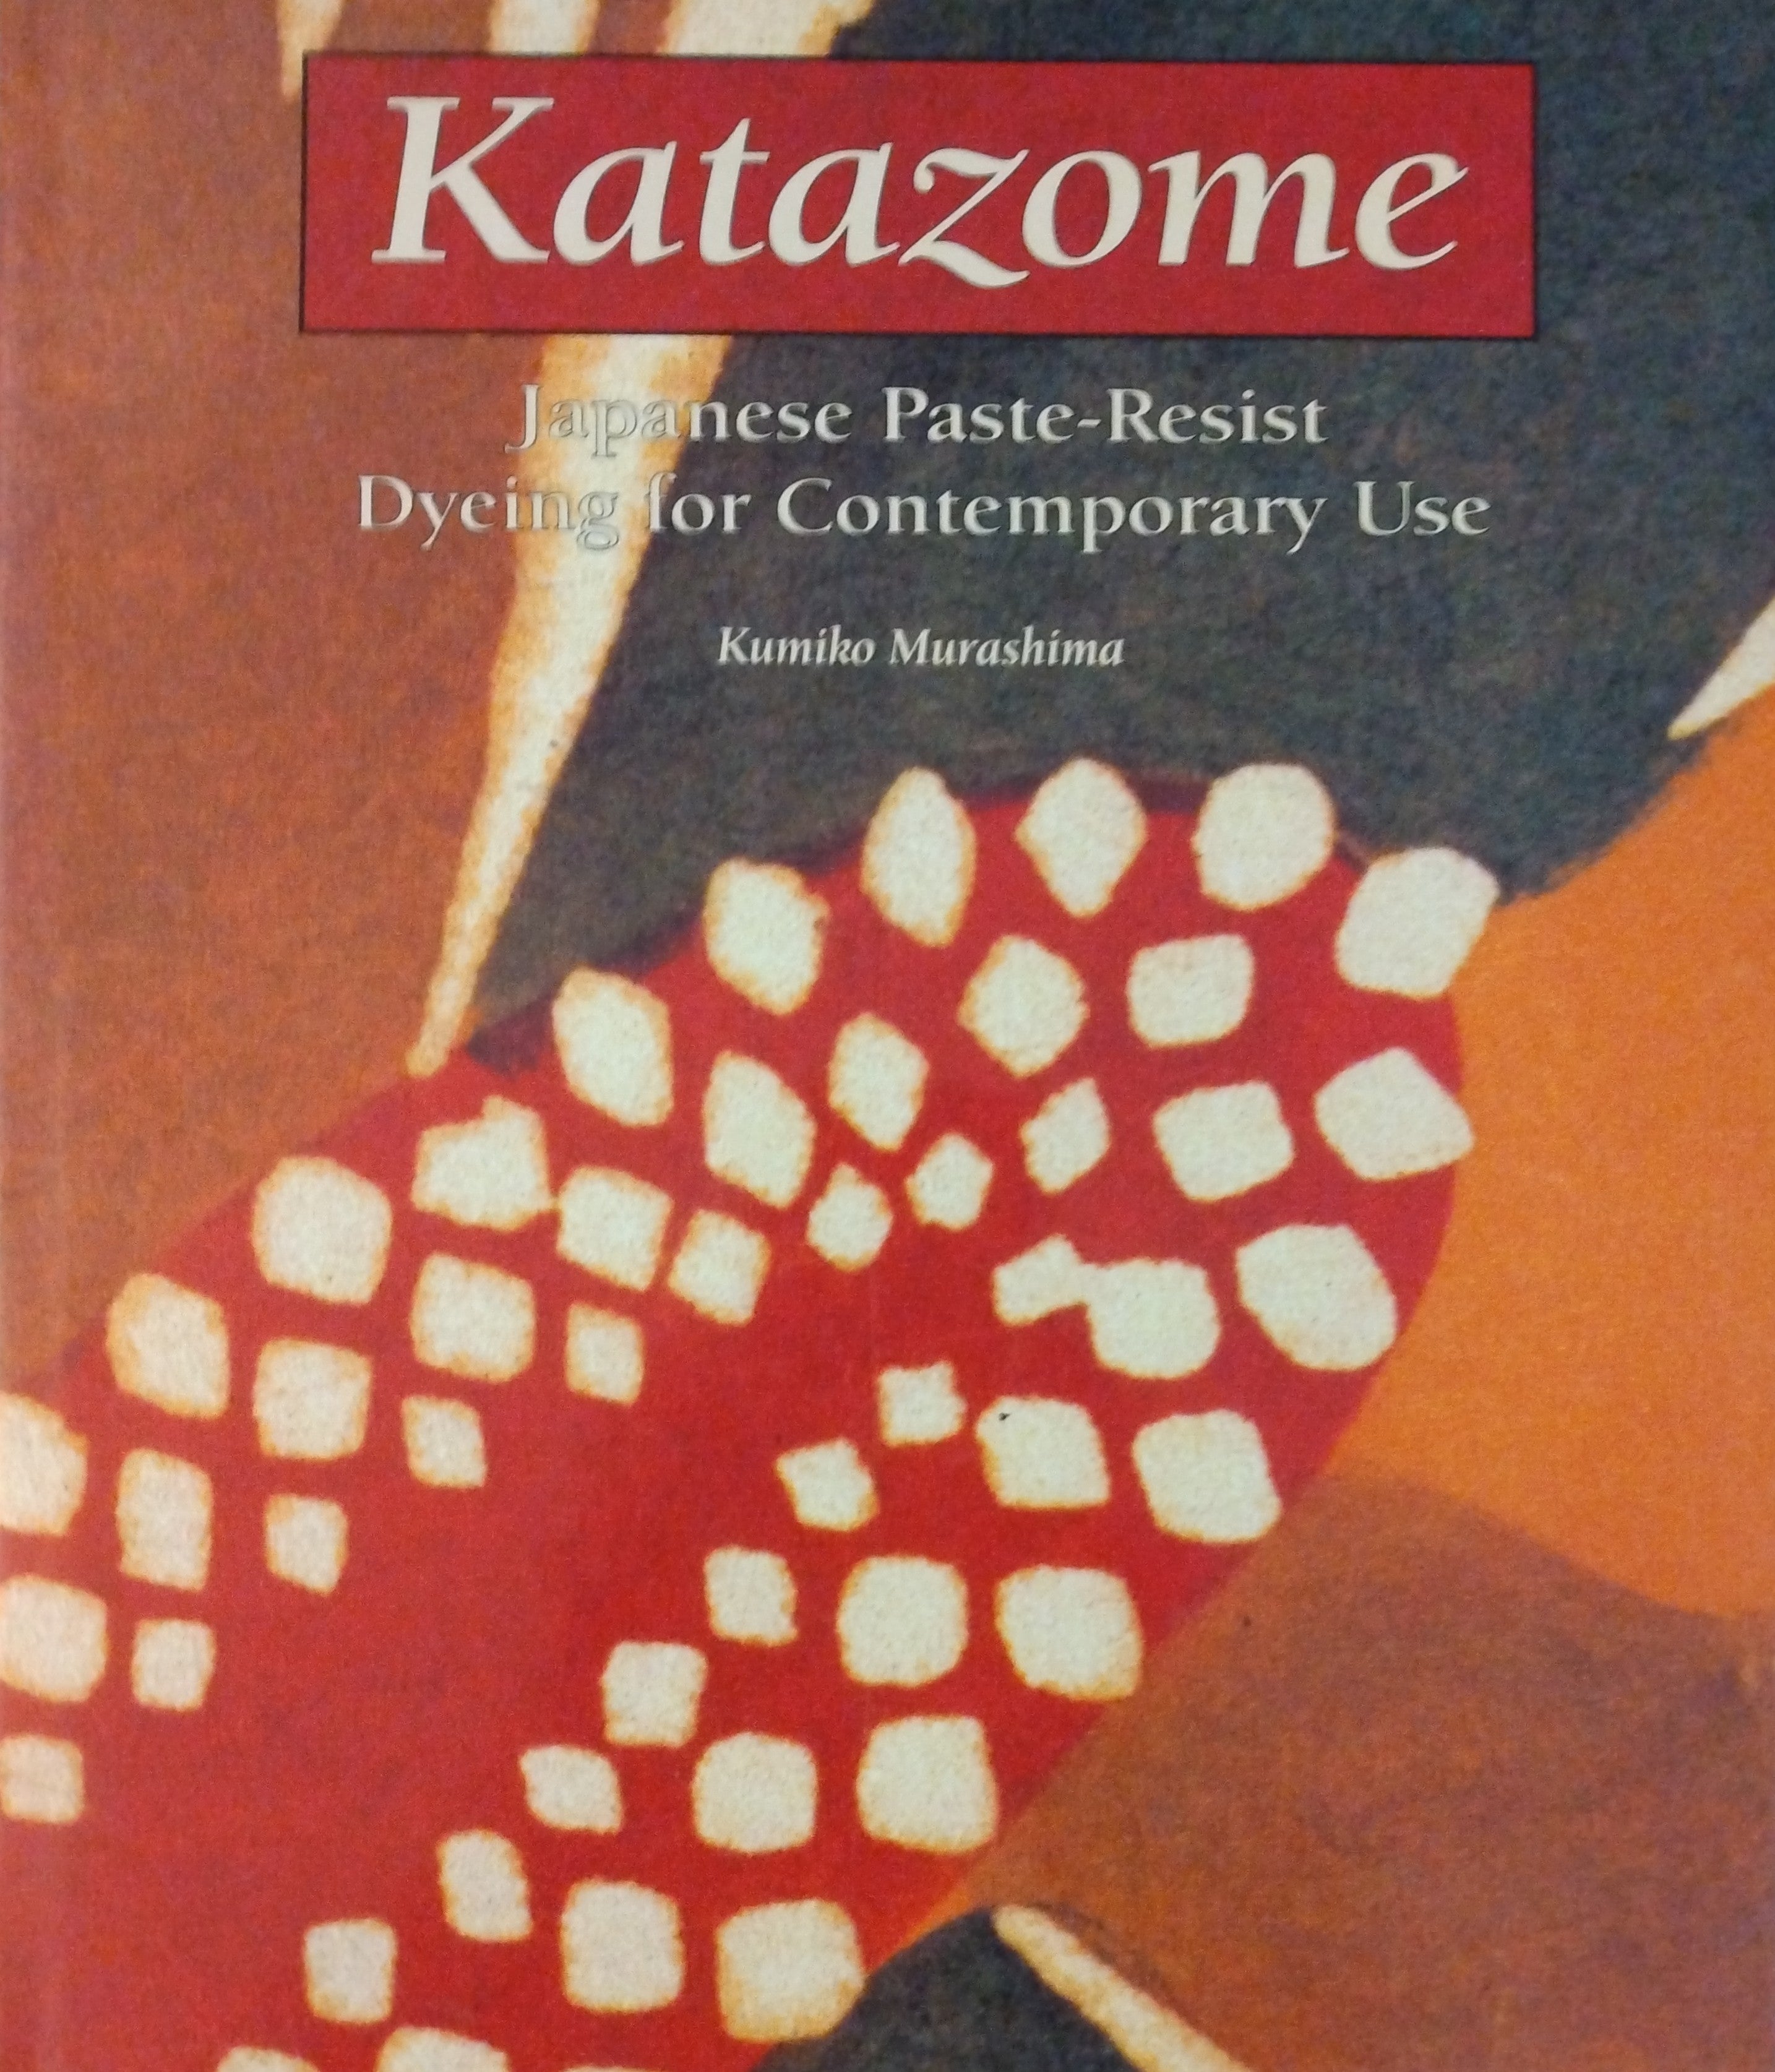 "Katazome: Japanese Paste-Resist Dyeing for Contemporary Use", by Kumiko Murashima; Thiel Collection